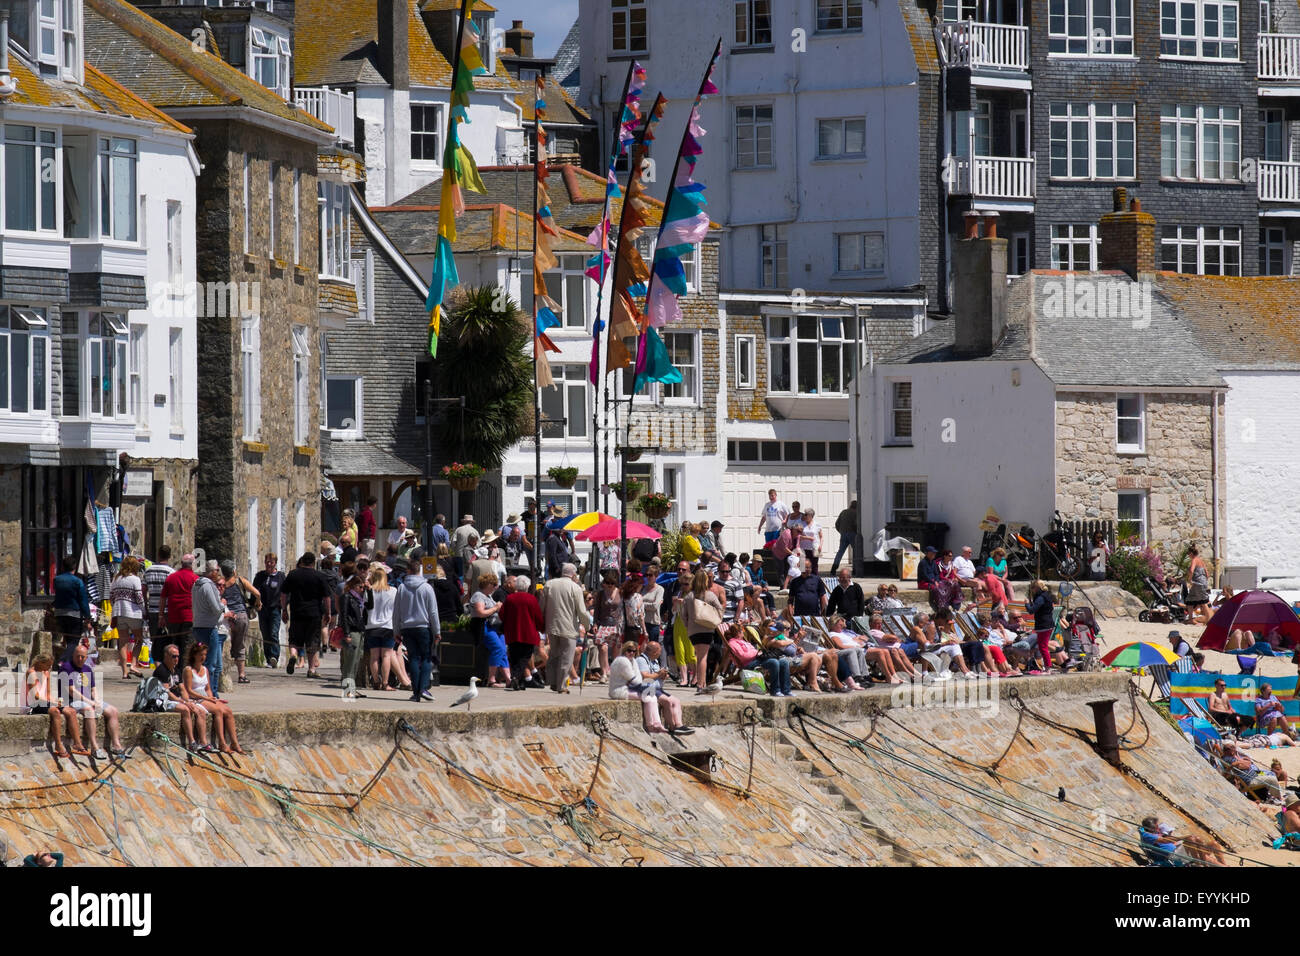 A crowded summer scene on the seafront at St Ives, Cornwall, England, UK Stock Photo